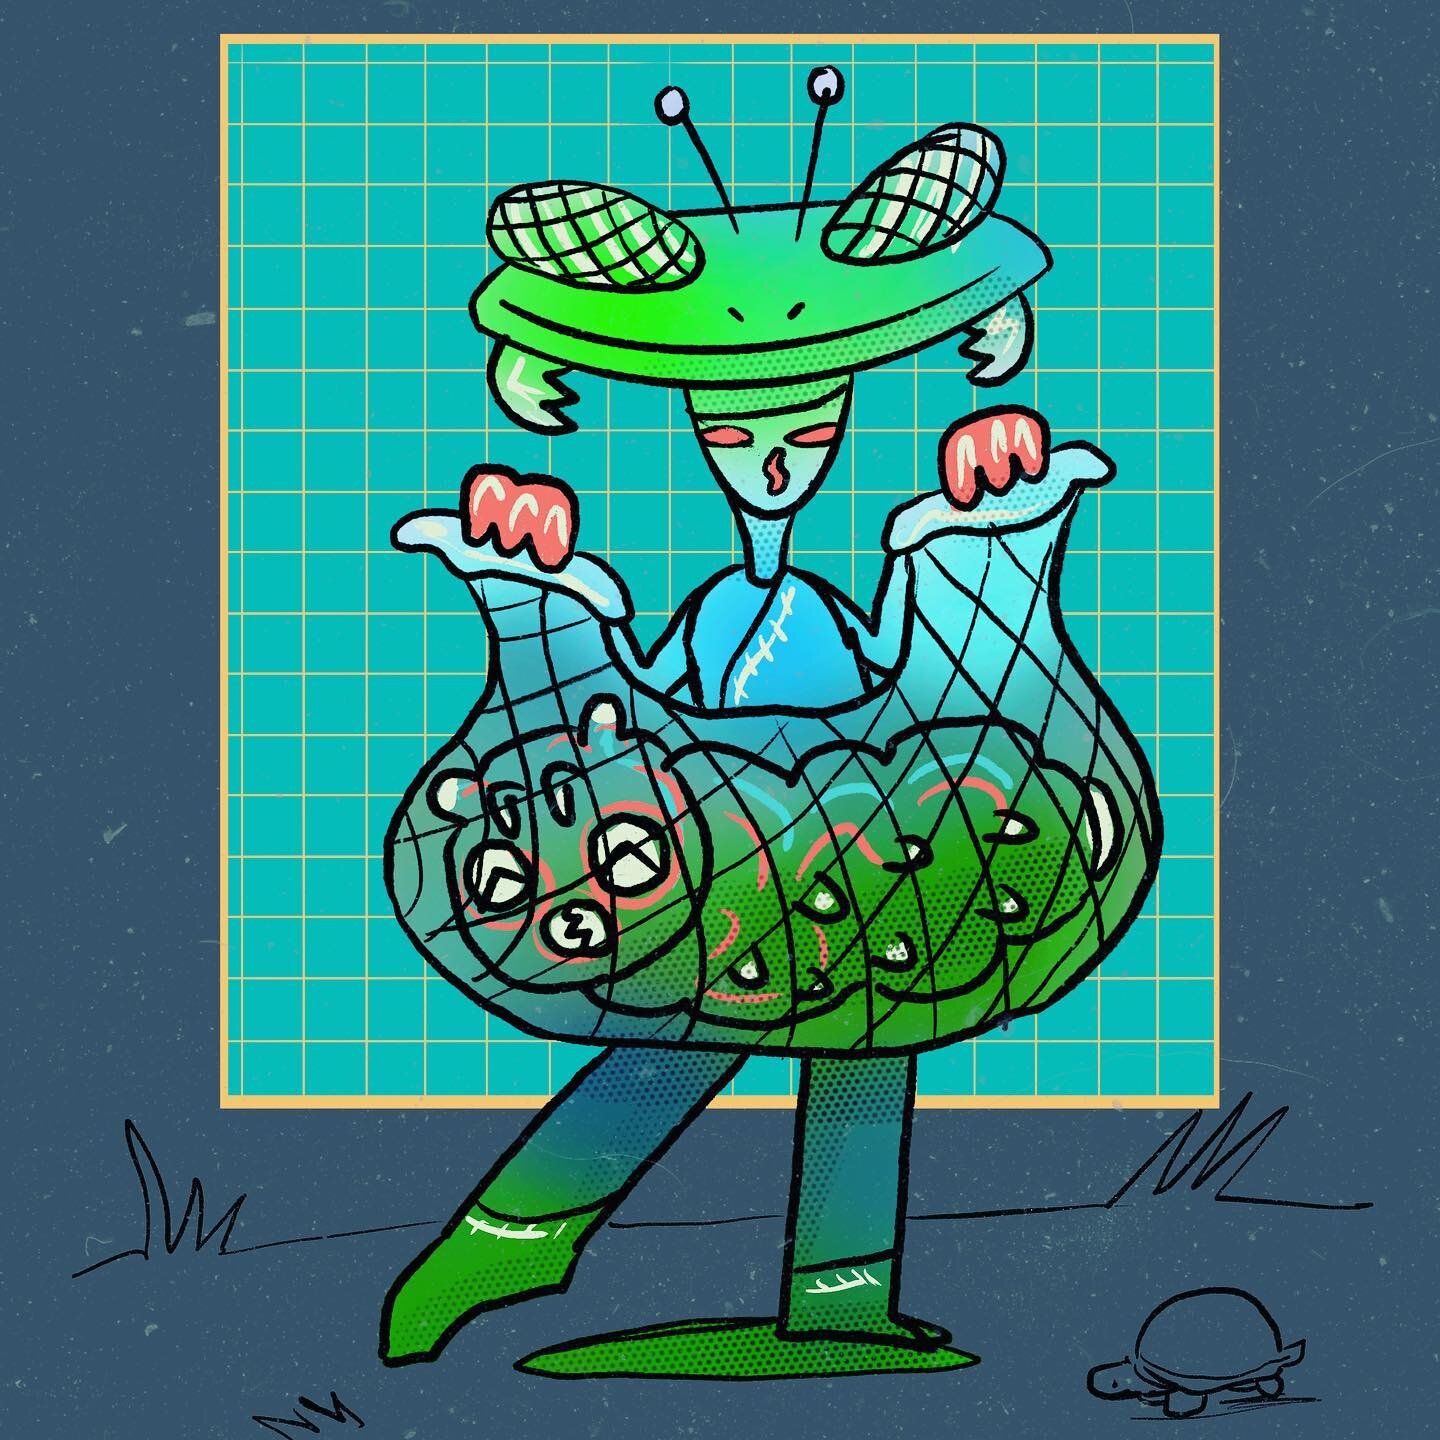 Master Bug Catcher

Zooty-Poo always has their hands full with lots of lovely larvae, but laments the day, the larvae leave their leaf-nest.

Day 10 of Maydwellers
#maydwellers @ayejay_make_art #mazedwellers #bugs #bugrancher #ecofriendly #aliteratio